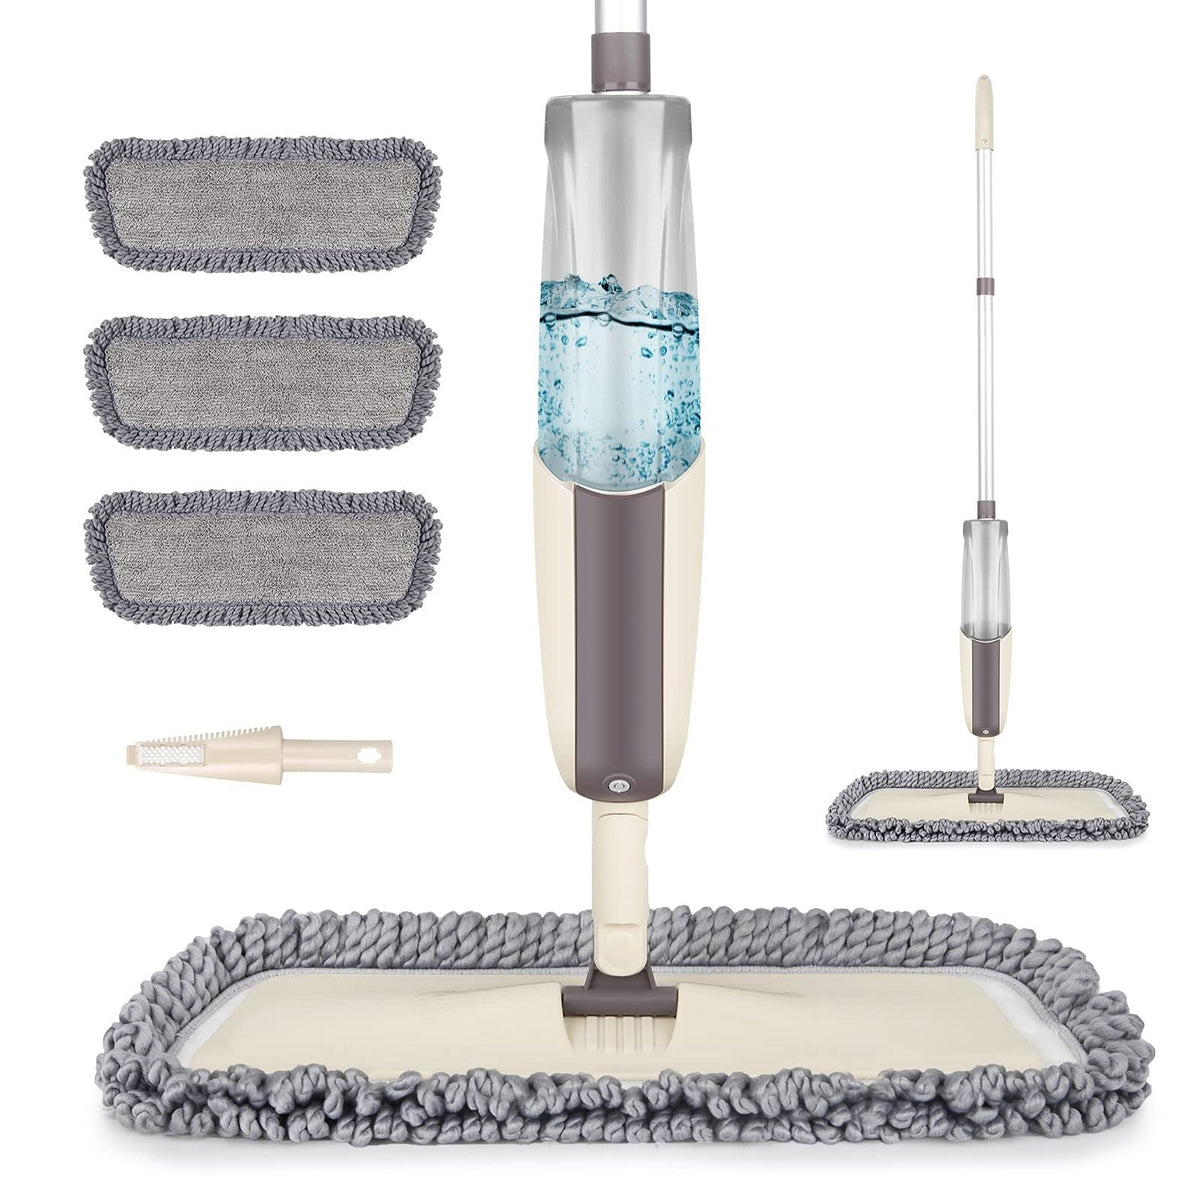 MEXERRIS Microfiber Spray Mop for Floor Cleaning - Wet and Dry, 360 Degree Spin Microfiber Dust Kitchen Mop with 410ml Water